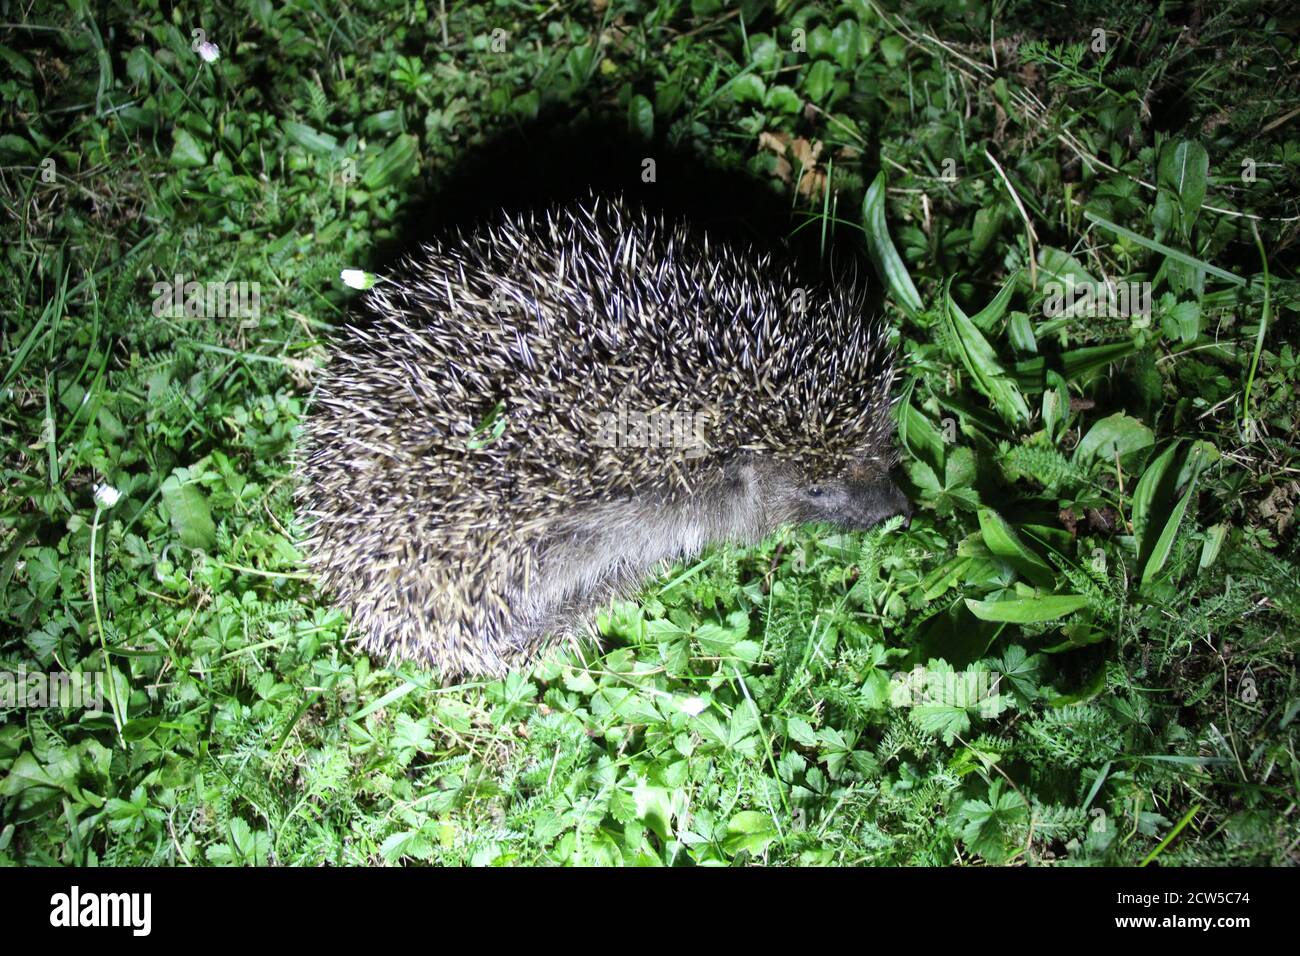 The European hedgehog rolled itself up but now feels more relaxed. You can see the furry belly of this hedgehog! This is near Prosek, Prague. Stock Photo